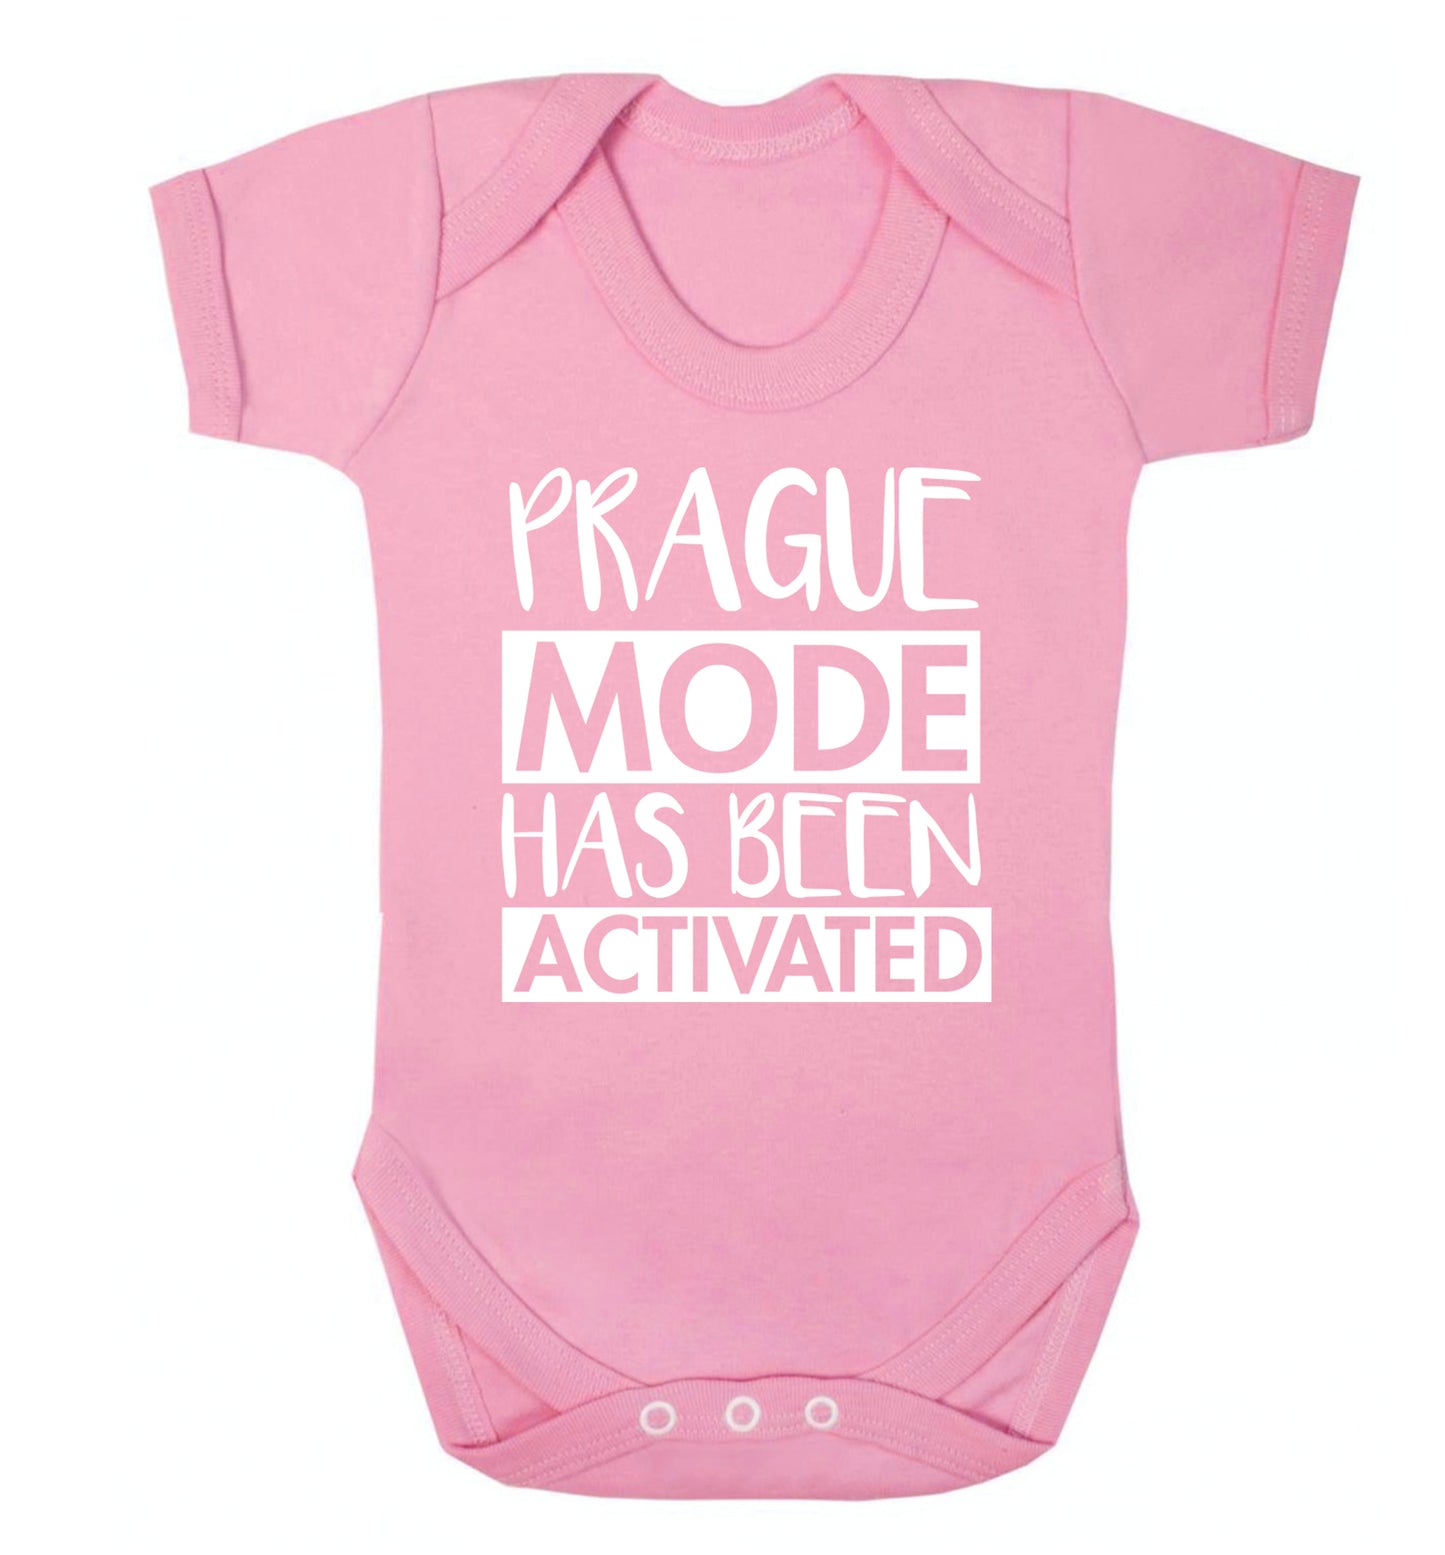 Prague mode has been activated Baby Vest pale pink 18-24 months